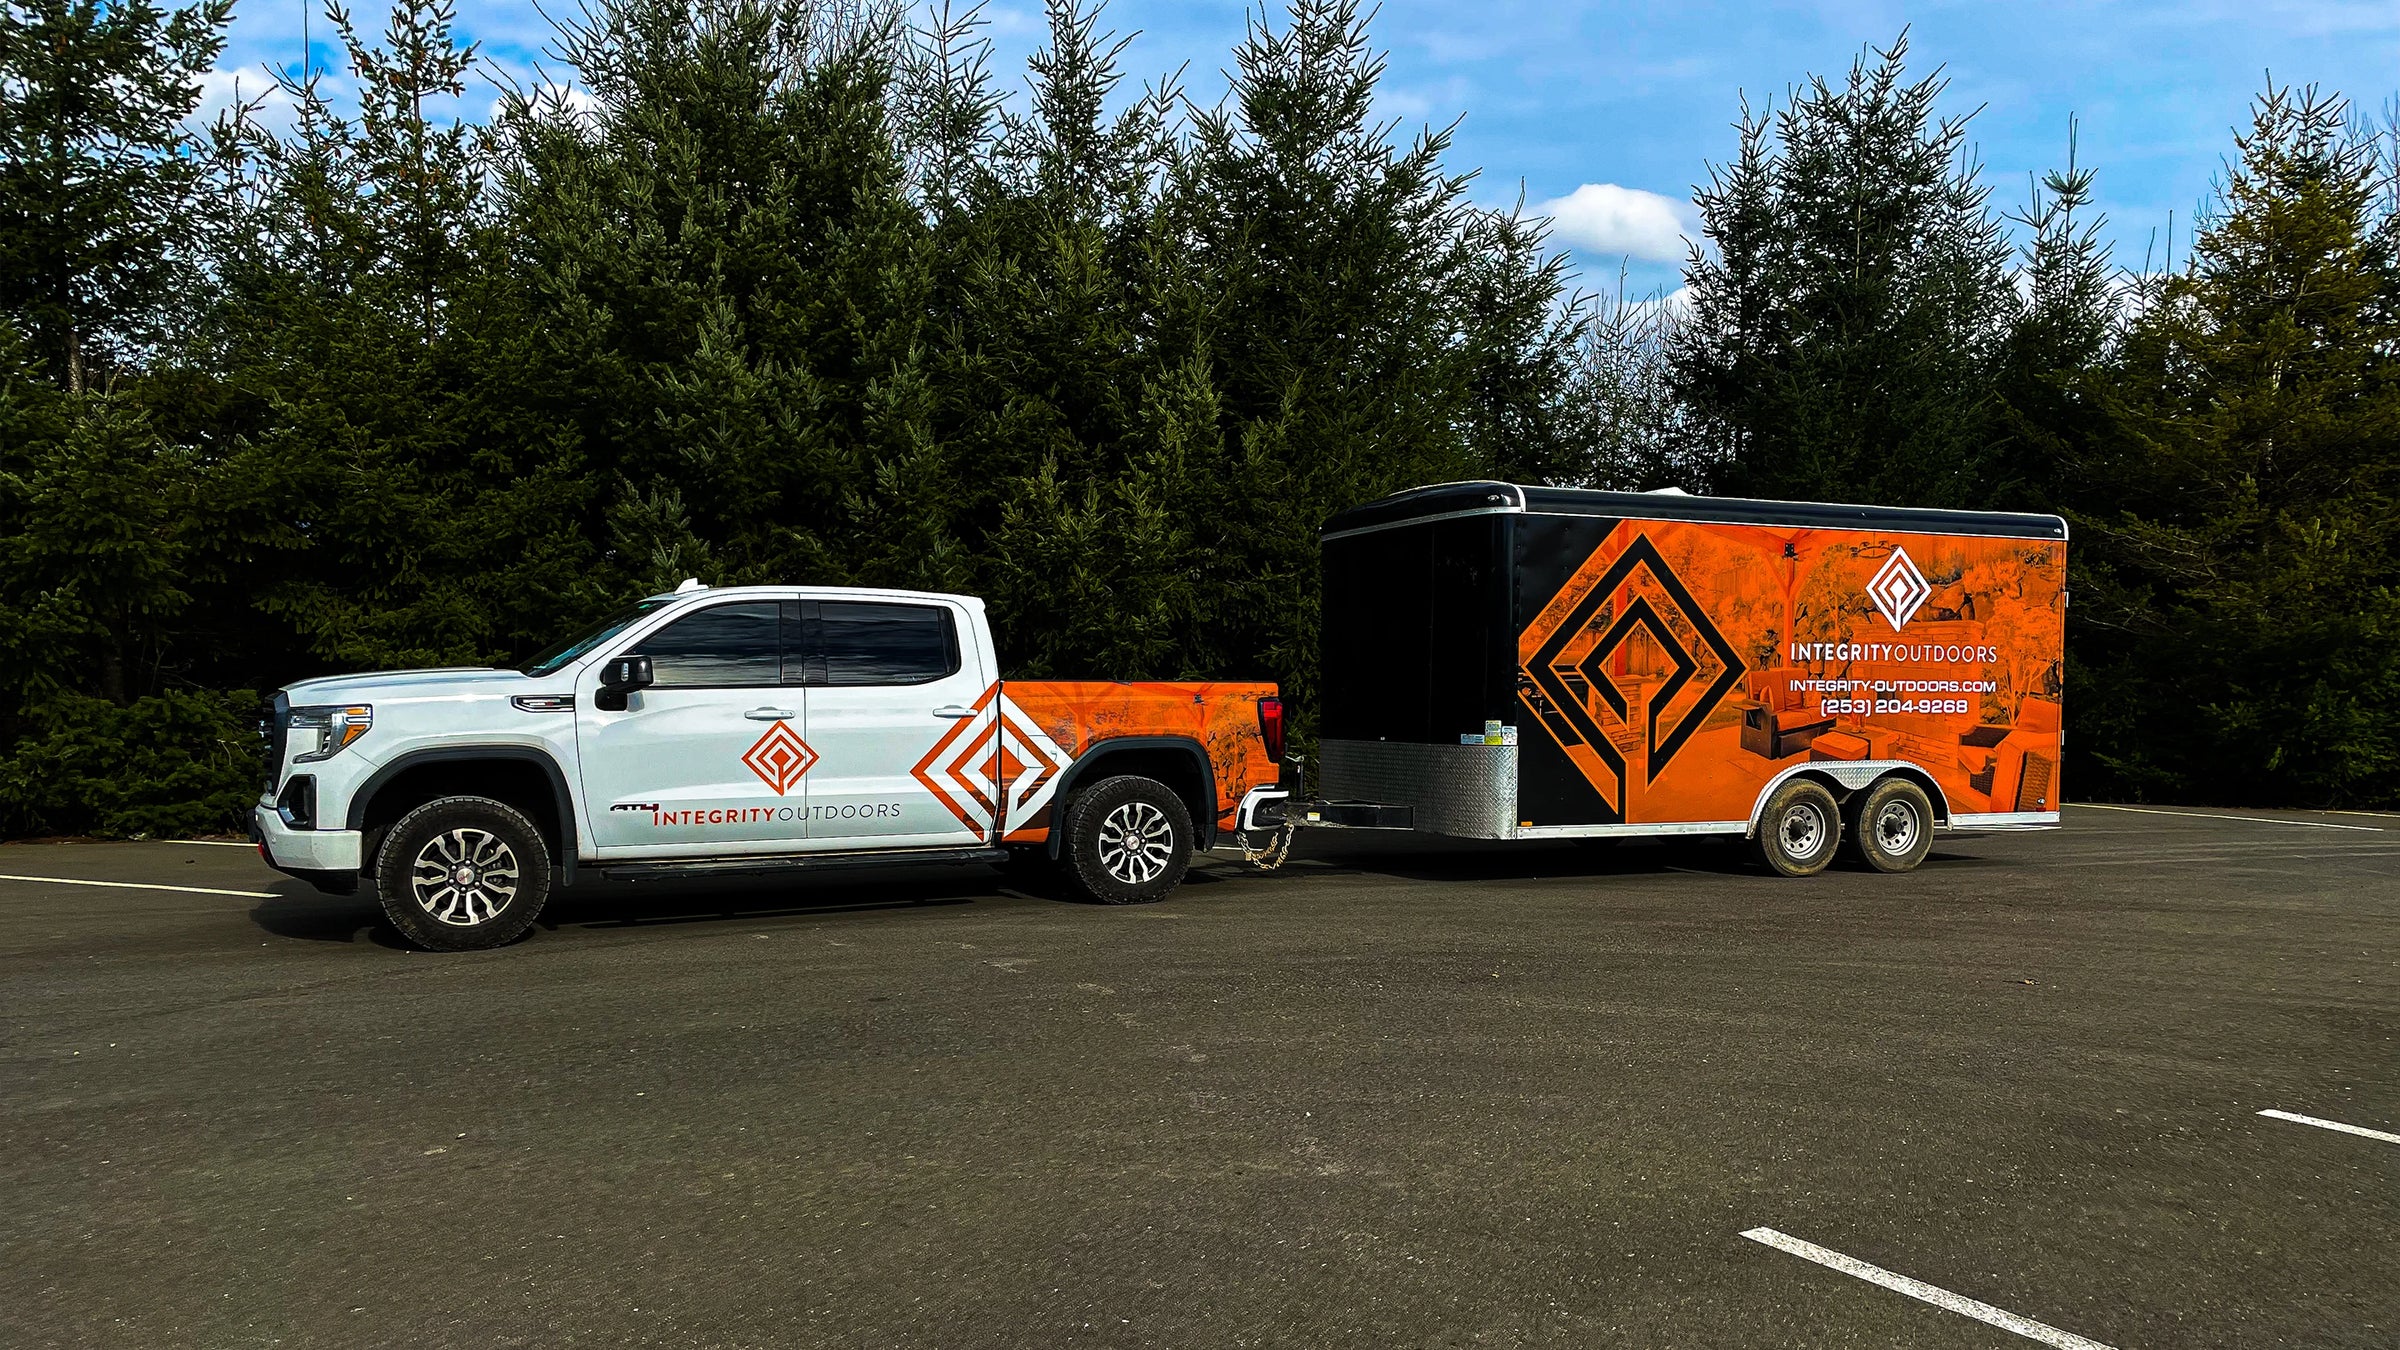 Integrity outdoors vinyl truck and trailer vinyl wrap done by Ardor Printing in Seattle area.